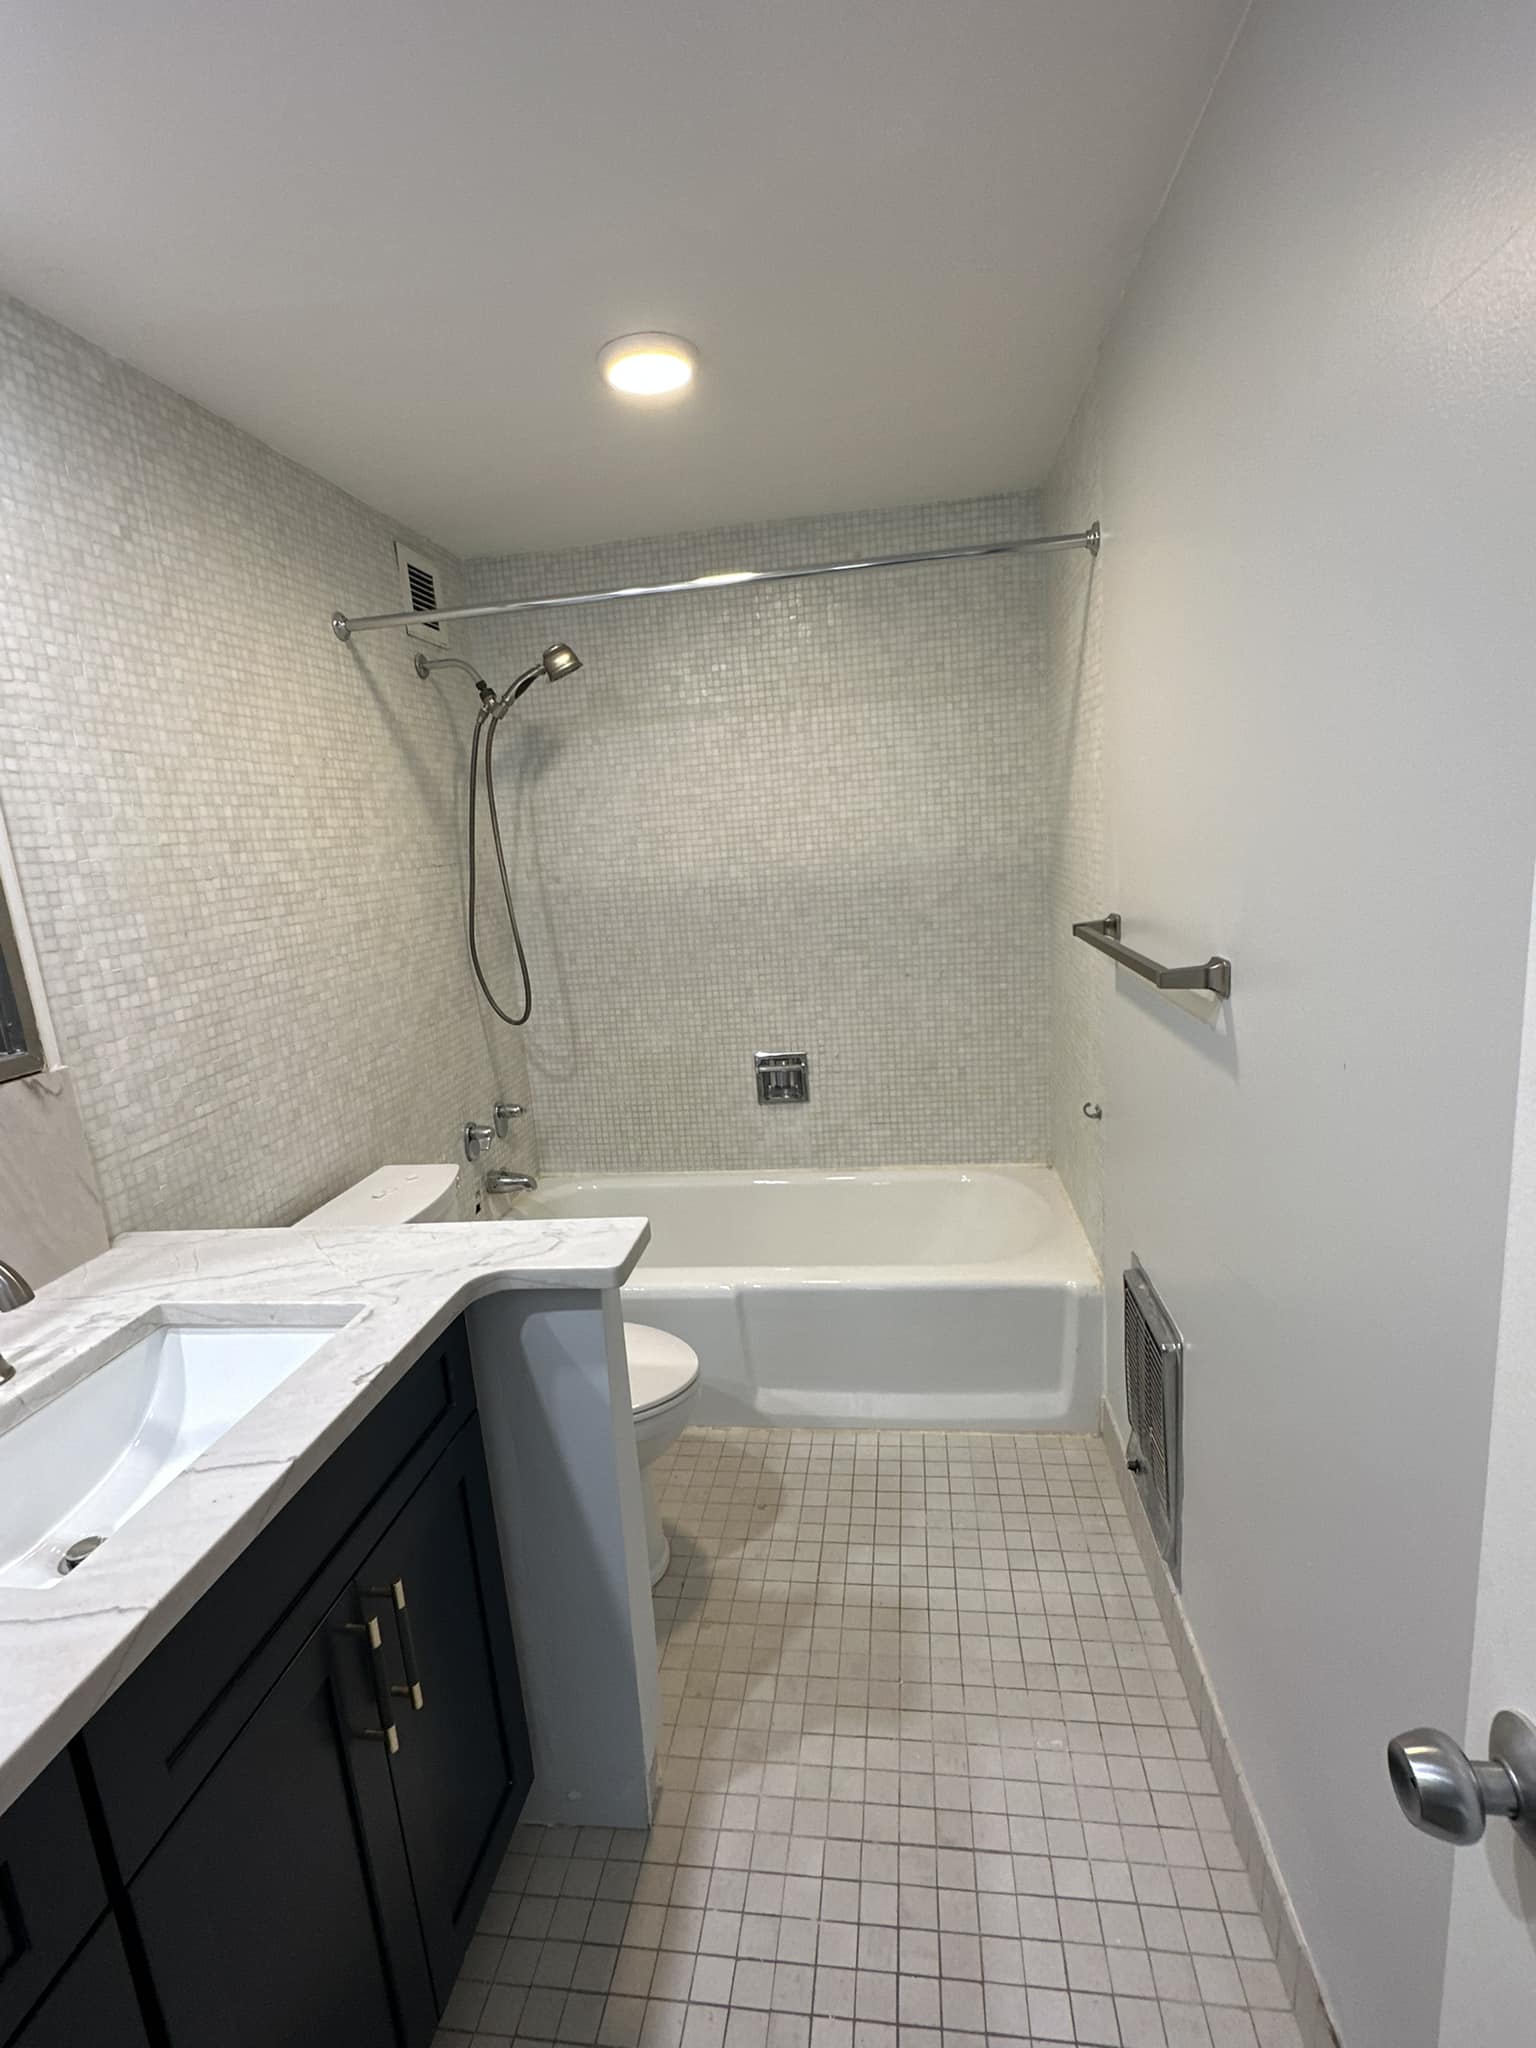 Pittsburgh Bathroom Remodeling on a Budget